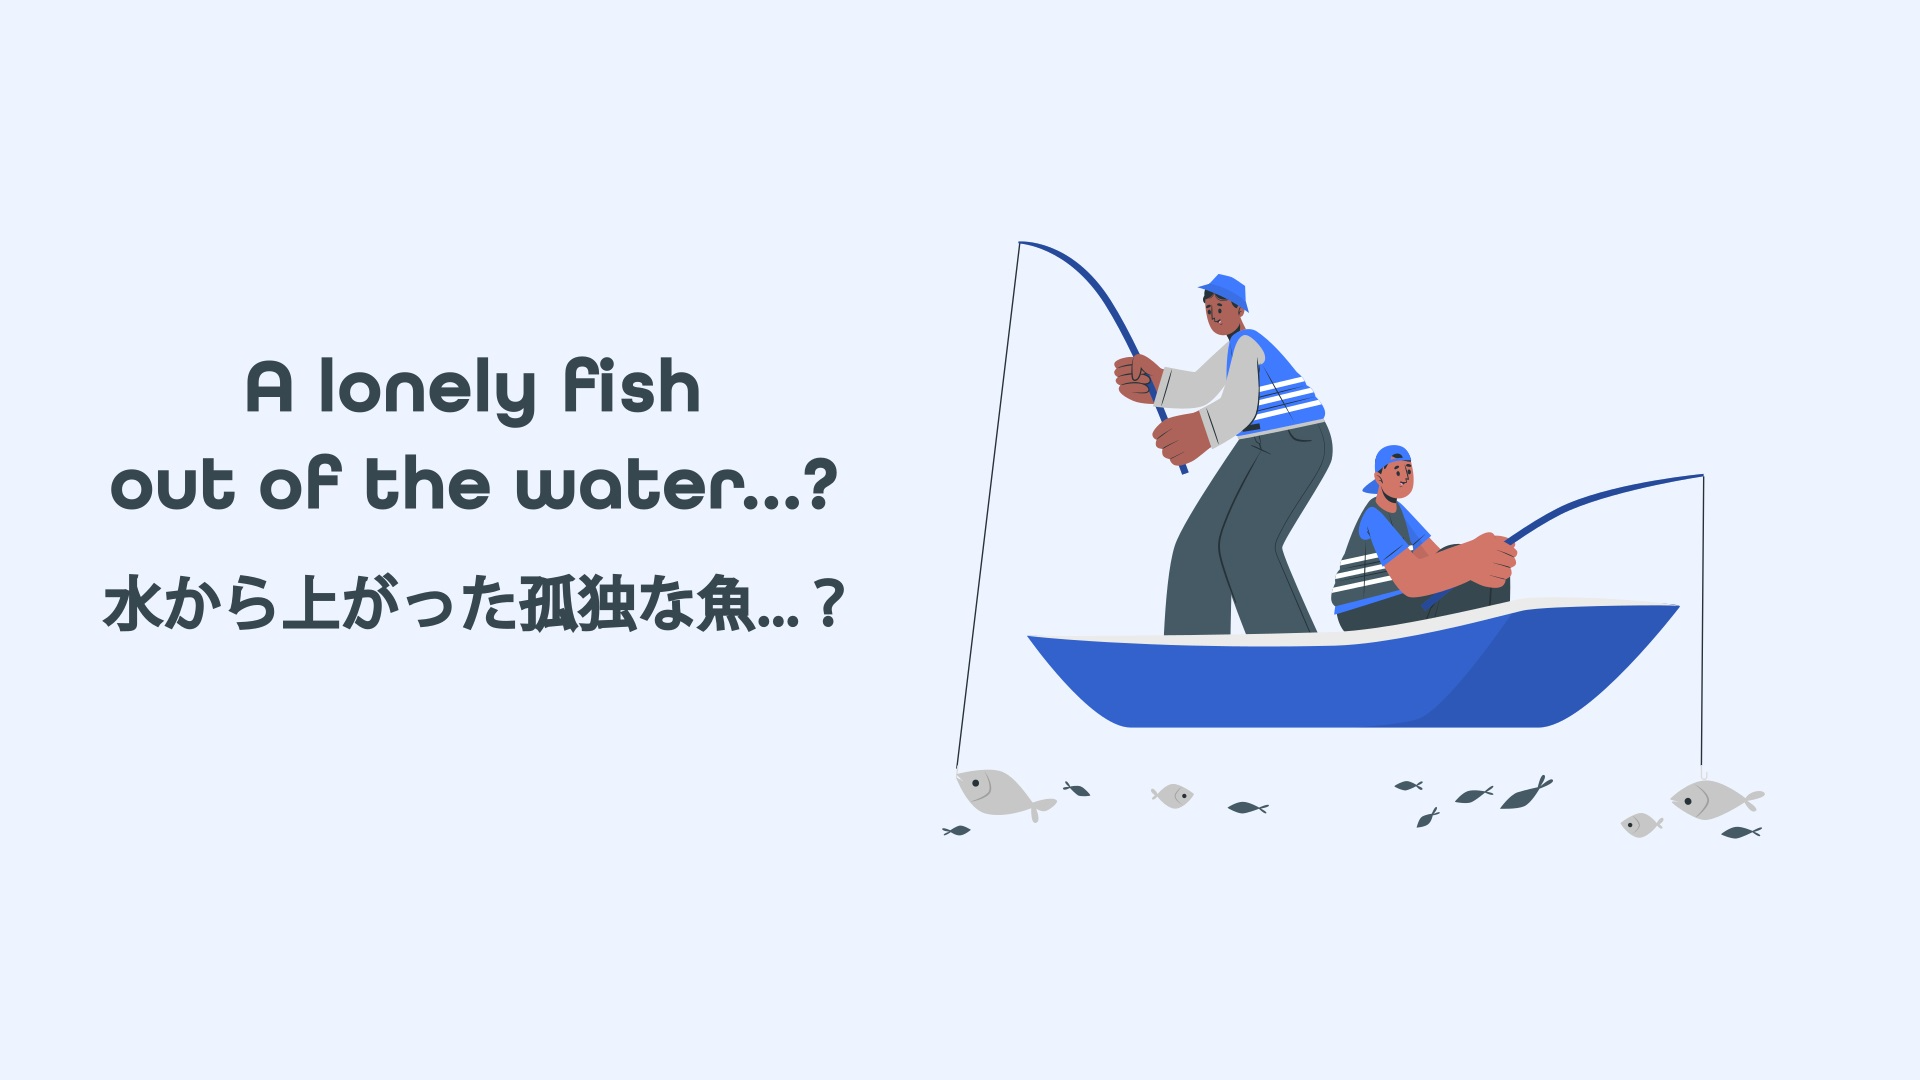 Featured image for “A lonely fish out of the water…?  水から上がった孤独な魚…？”